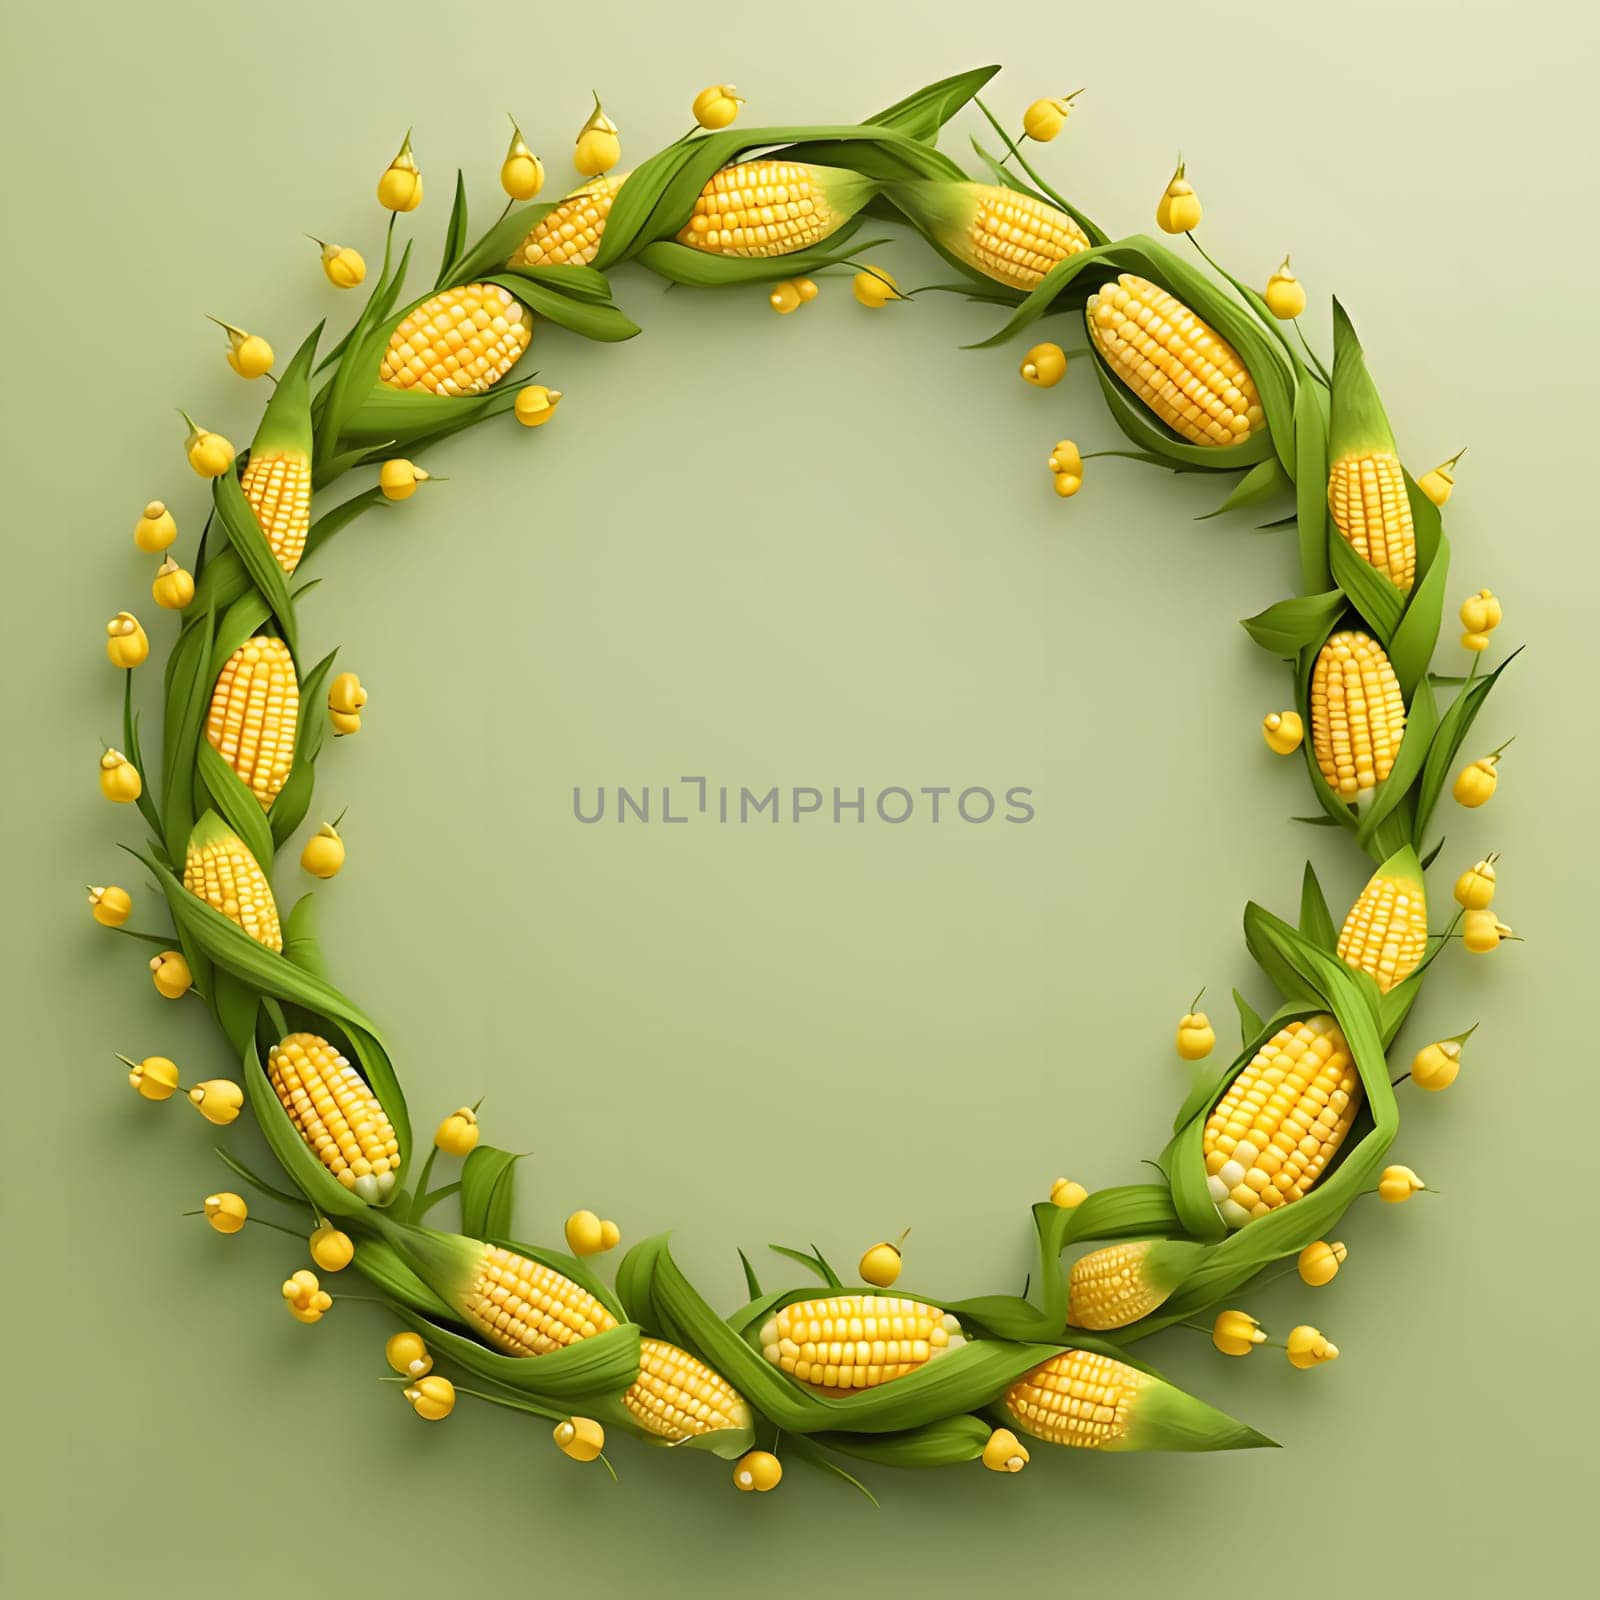 Illustration of a weir braided with corn cobs on a light green background. Corn as a dish of thanksgiving for the harvest. by ThemesS